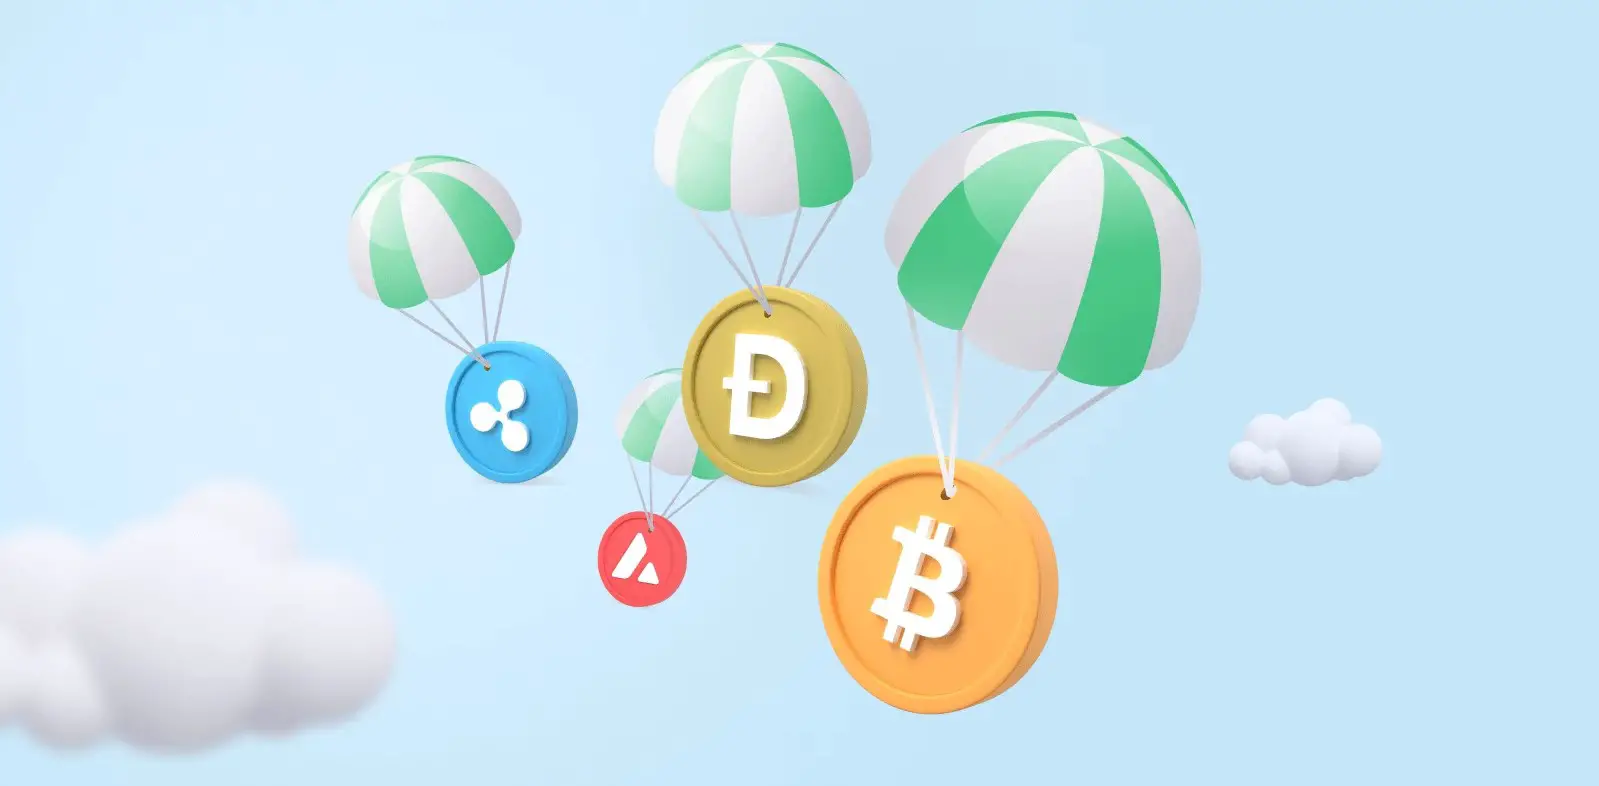 How do Cryptocurrency Airdrops Facilitate Entry